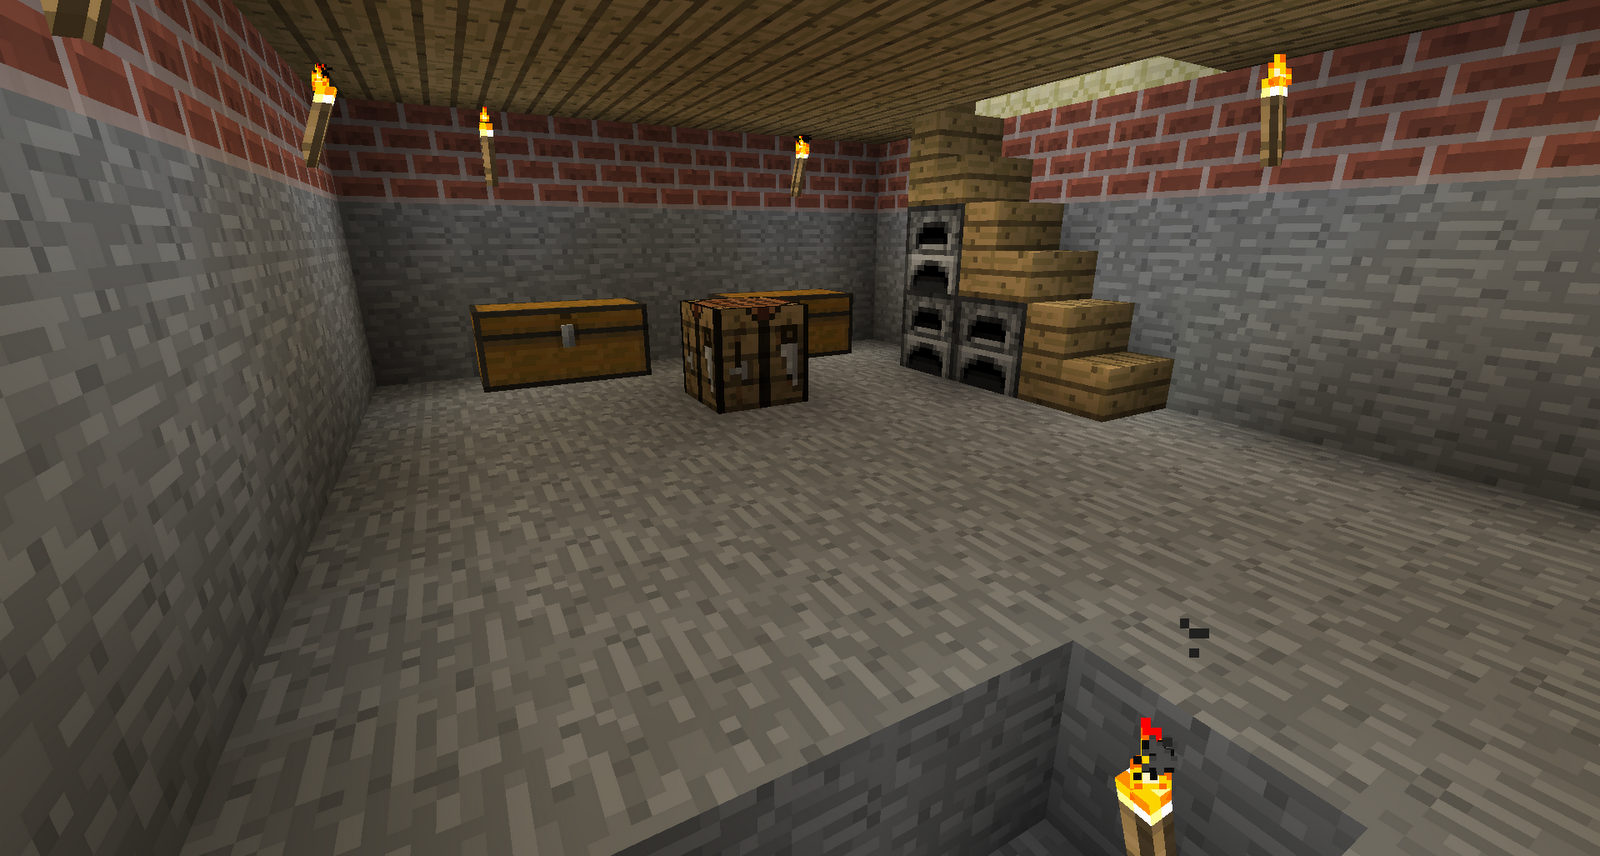 That's interesting...: Inside my Minecraft home
